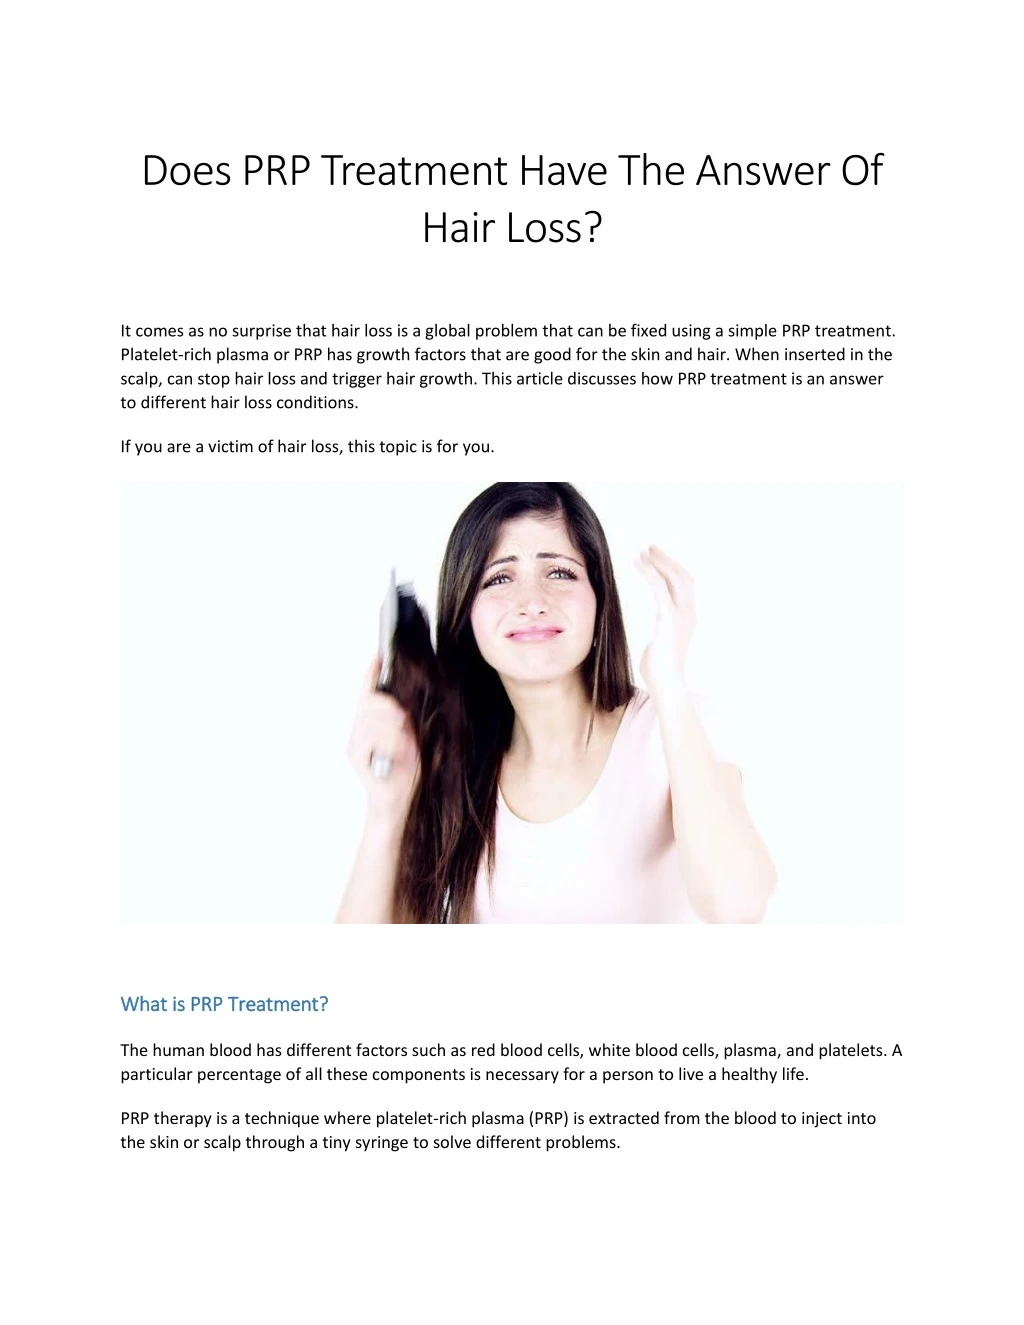 does prp treatment have the answer of hair loss